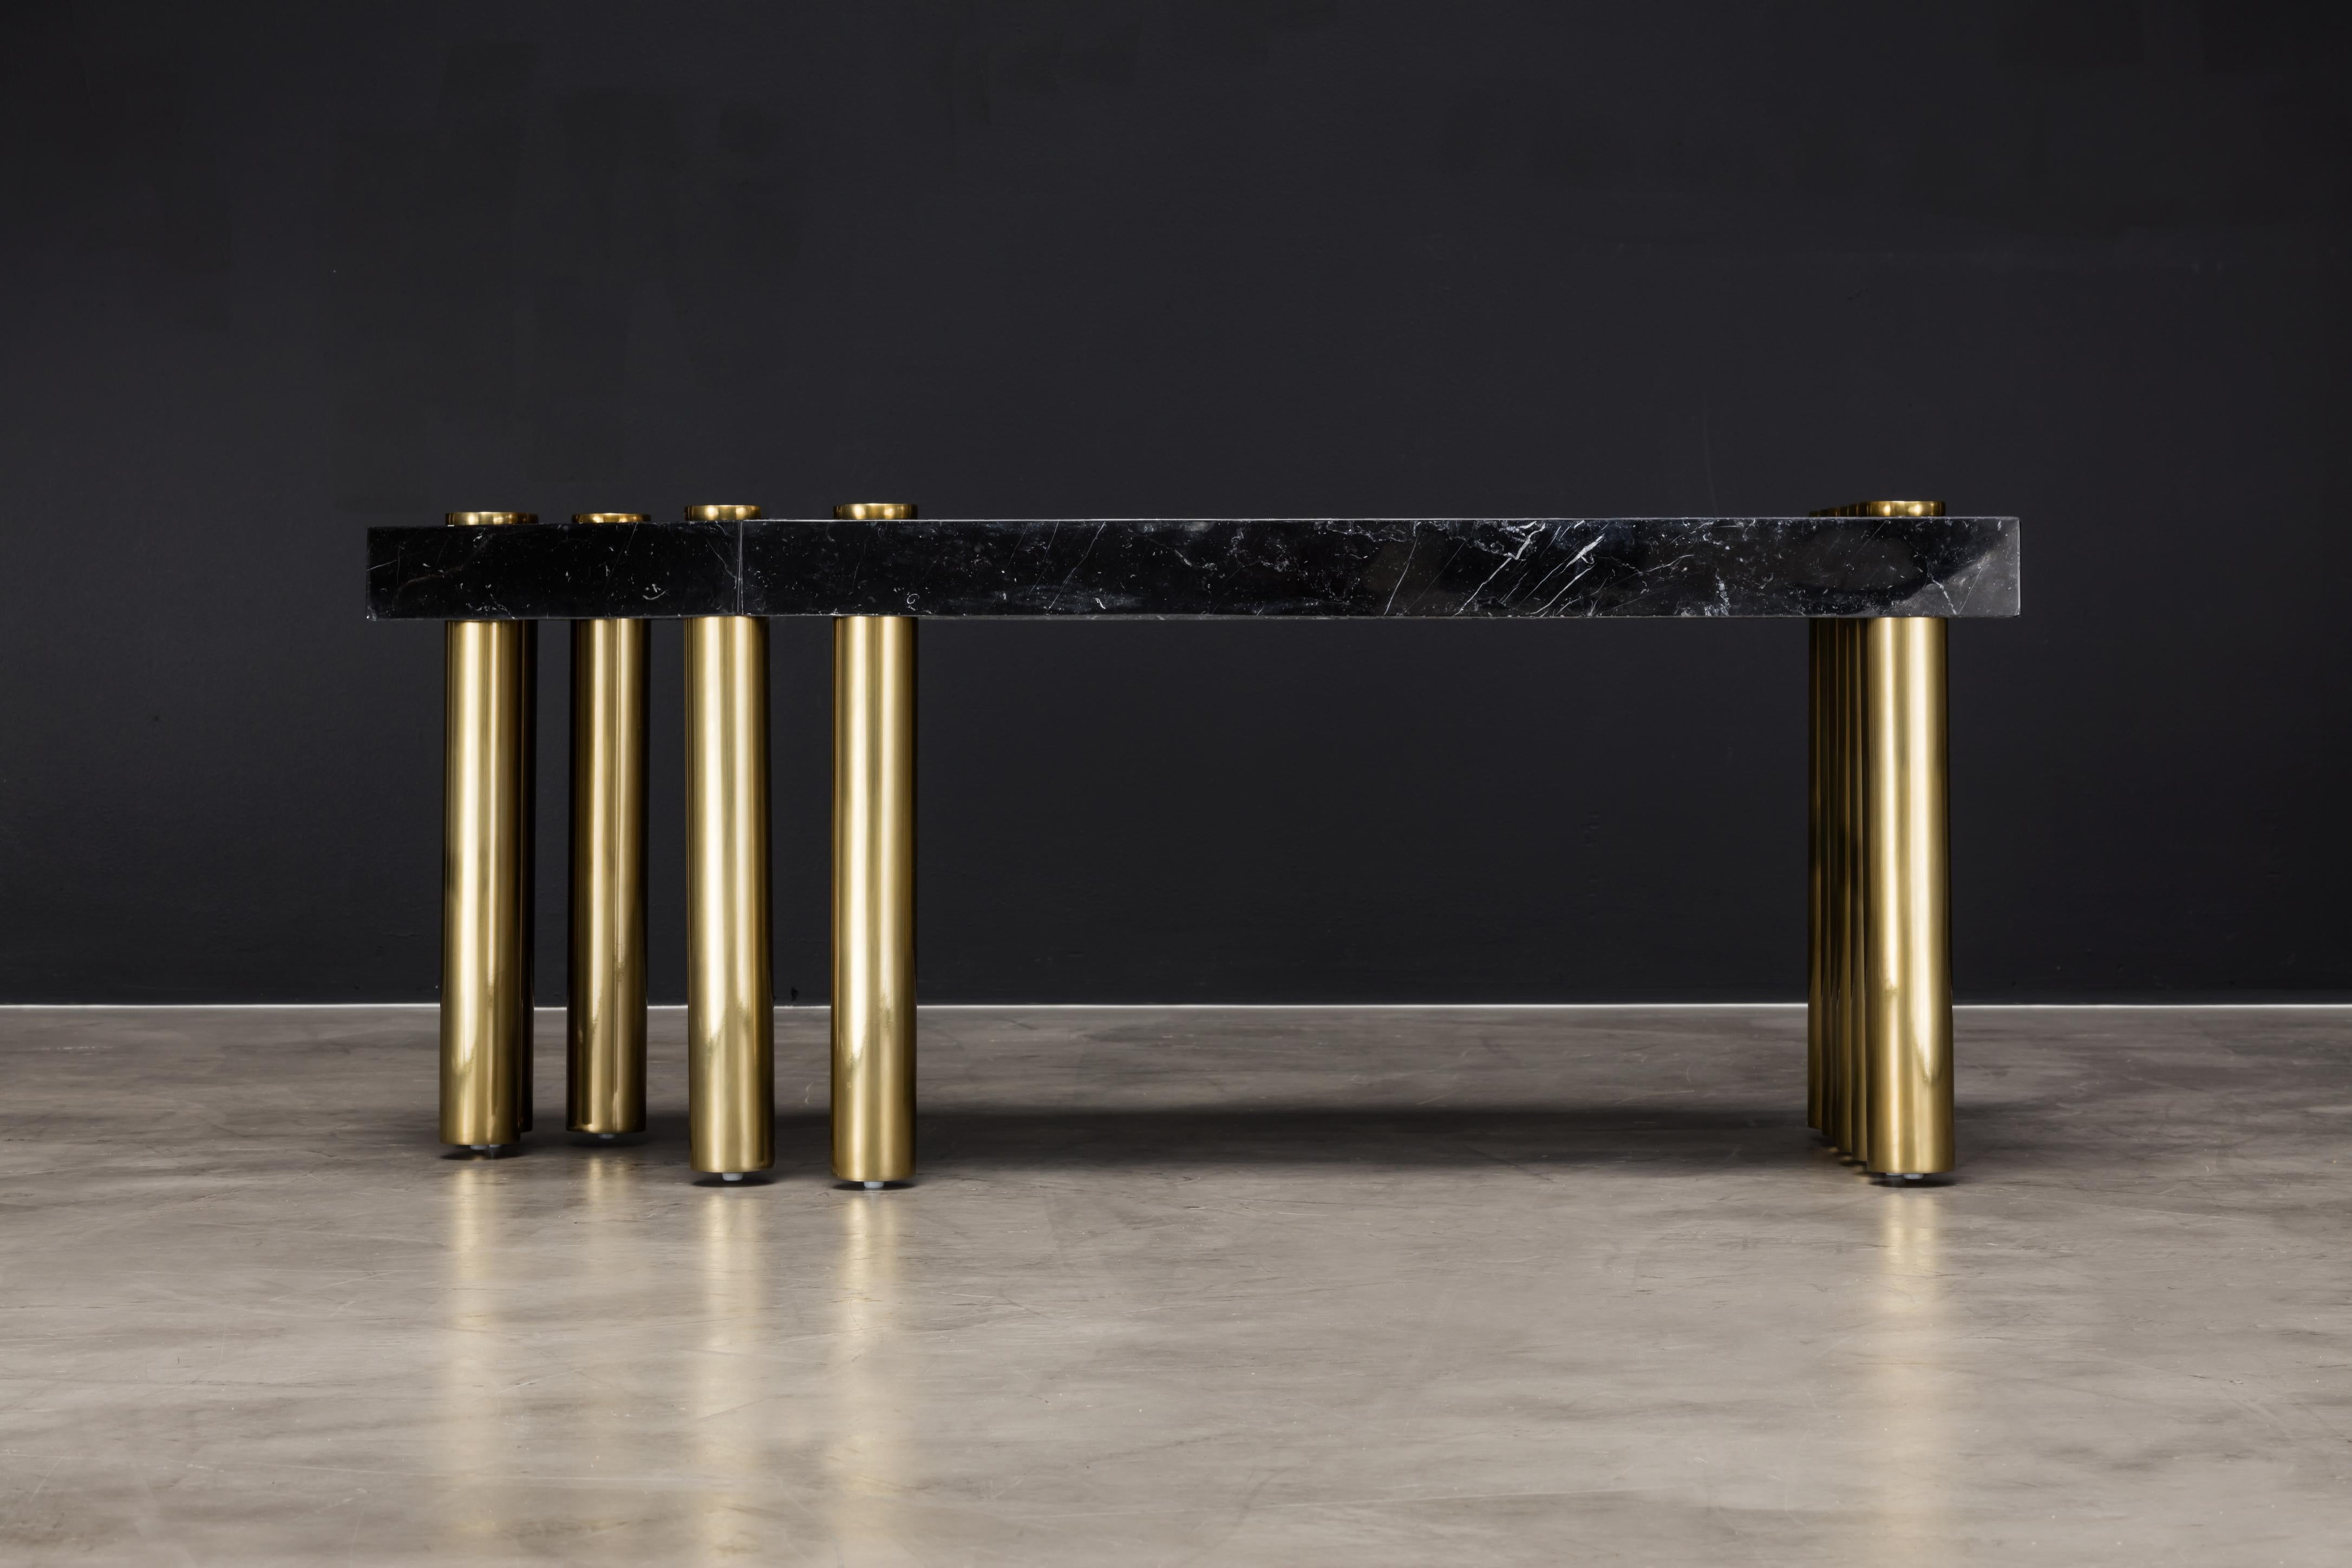 LUSTRE COFFEE TABLE - Nero Marquina Marble and Gold Powder Coated Metal

The Lustre coffee table is a contemporary and stylish cocktail table that combines powder-coated metal with a Nero Marquina marble top. The use of metal in the base of the